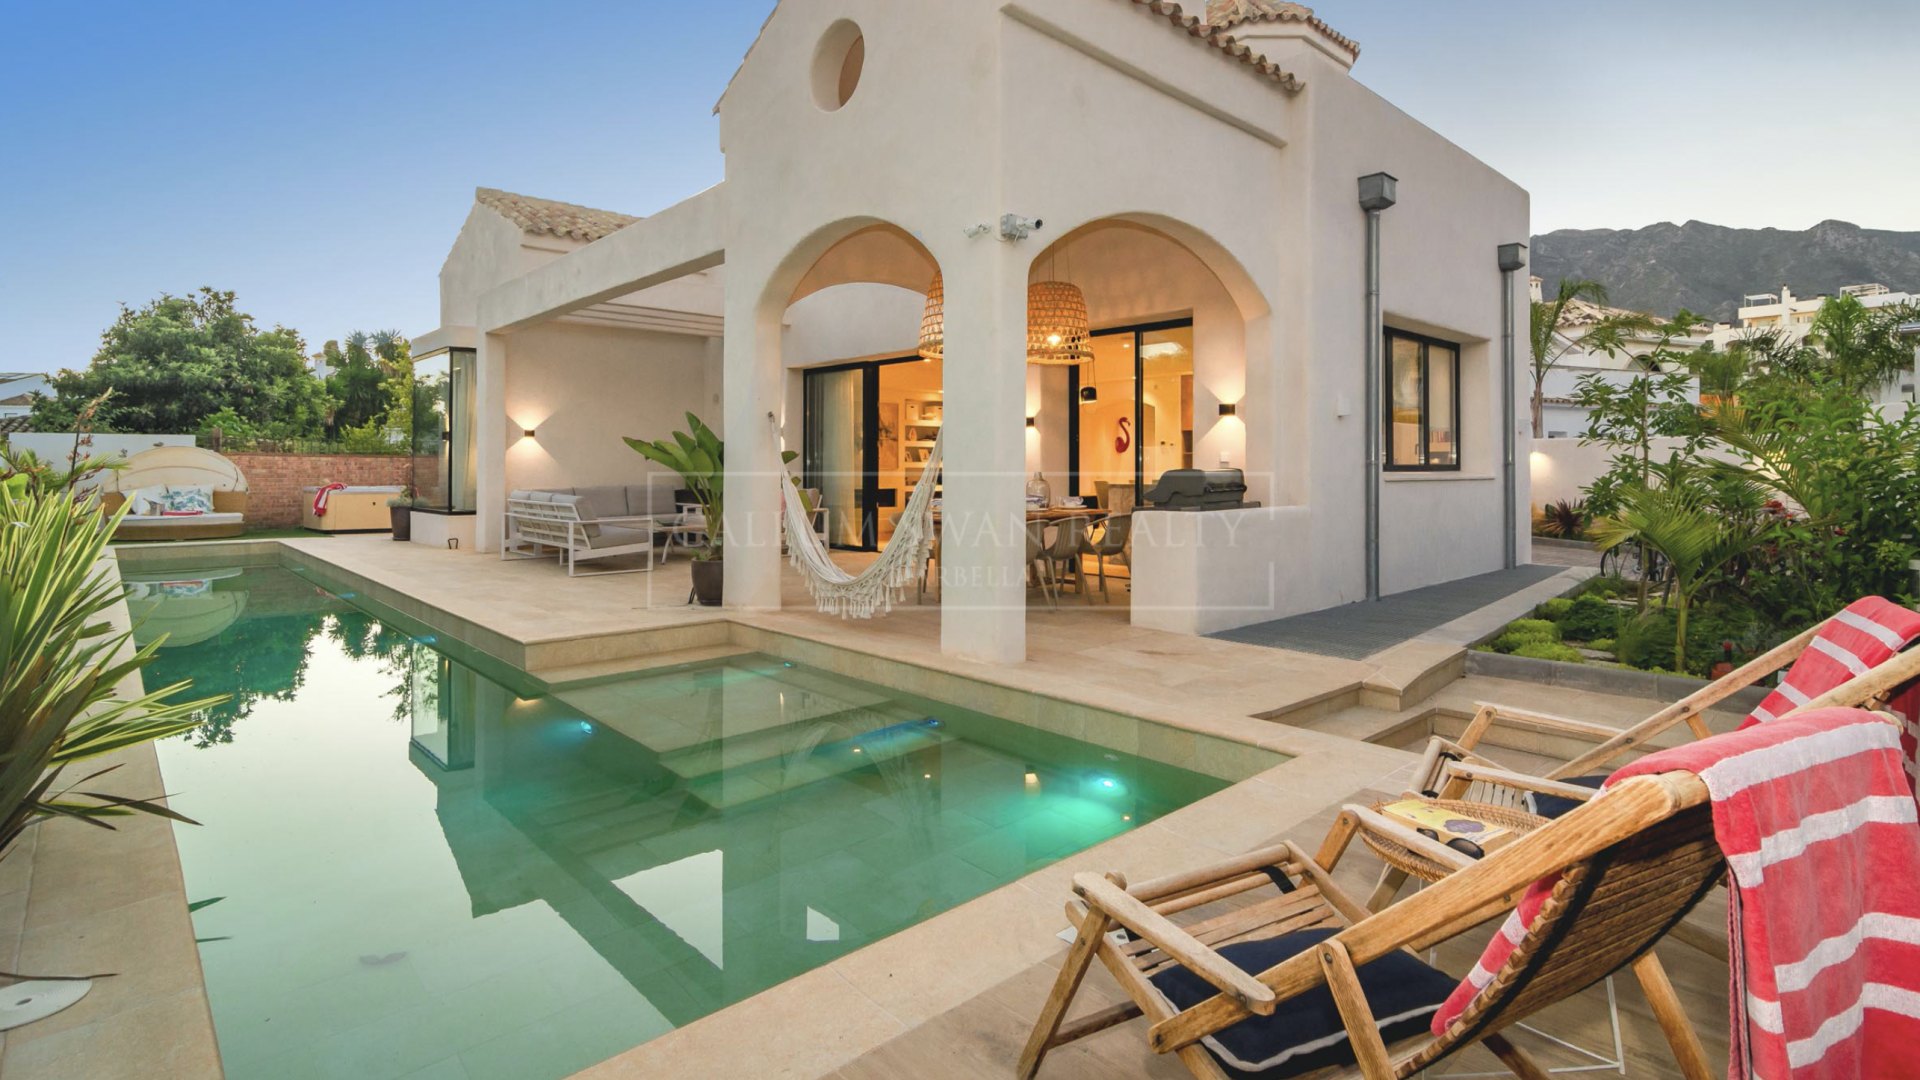 Charming brand new villa only a short walk from the beach on Marbella's Golden Mile